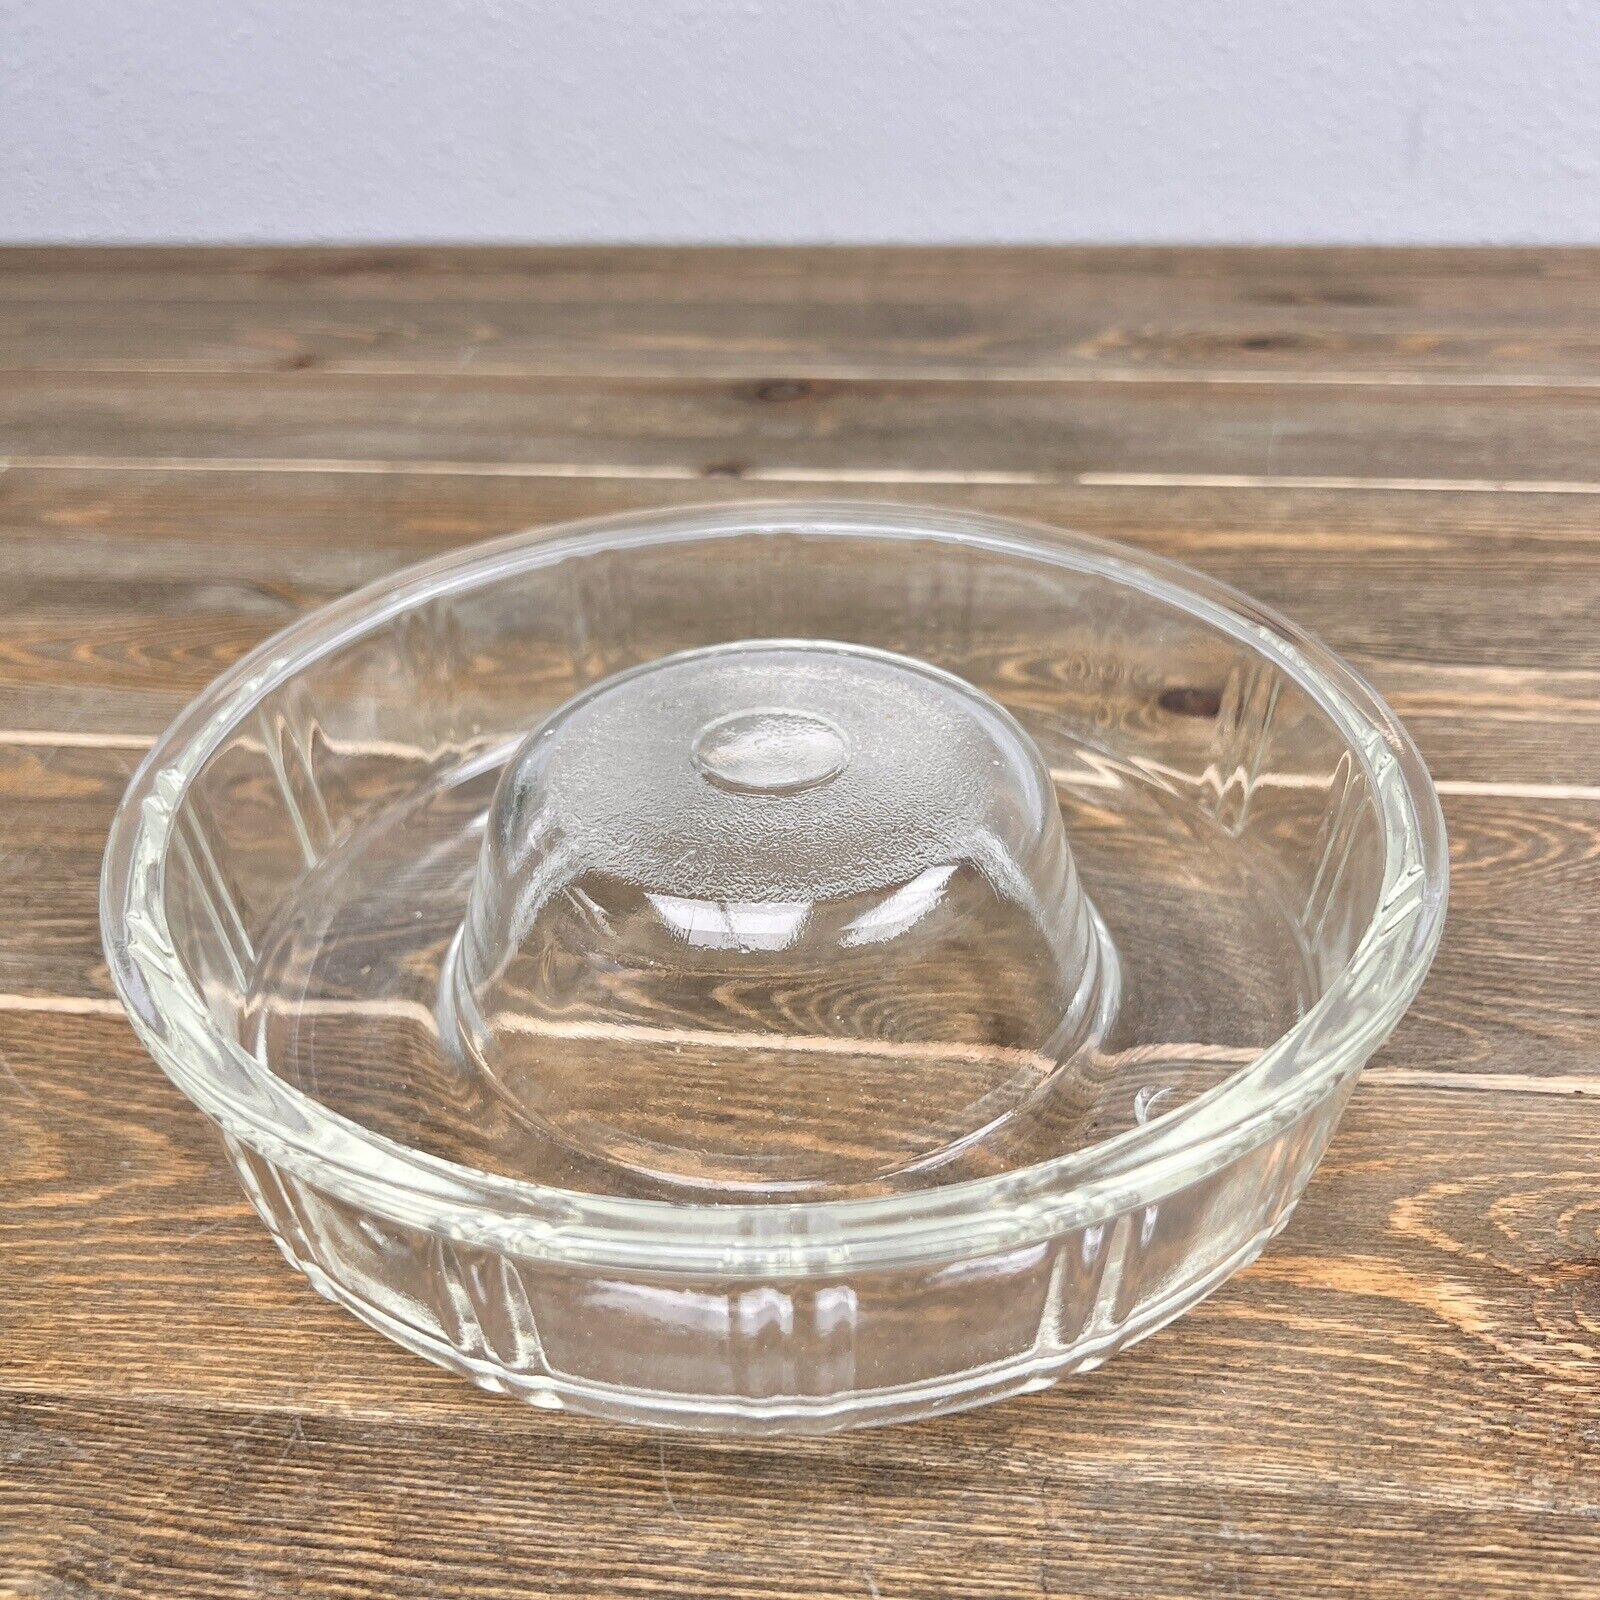 Vintage QUEEN ANNE GLASBAKE Clear Glass Bundt Cake Pan Jello Ring Mold